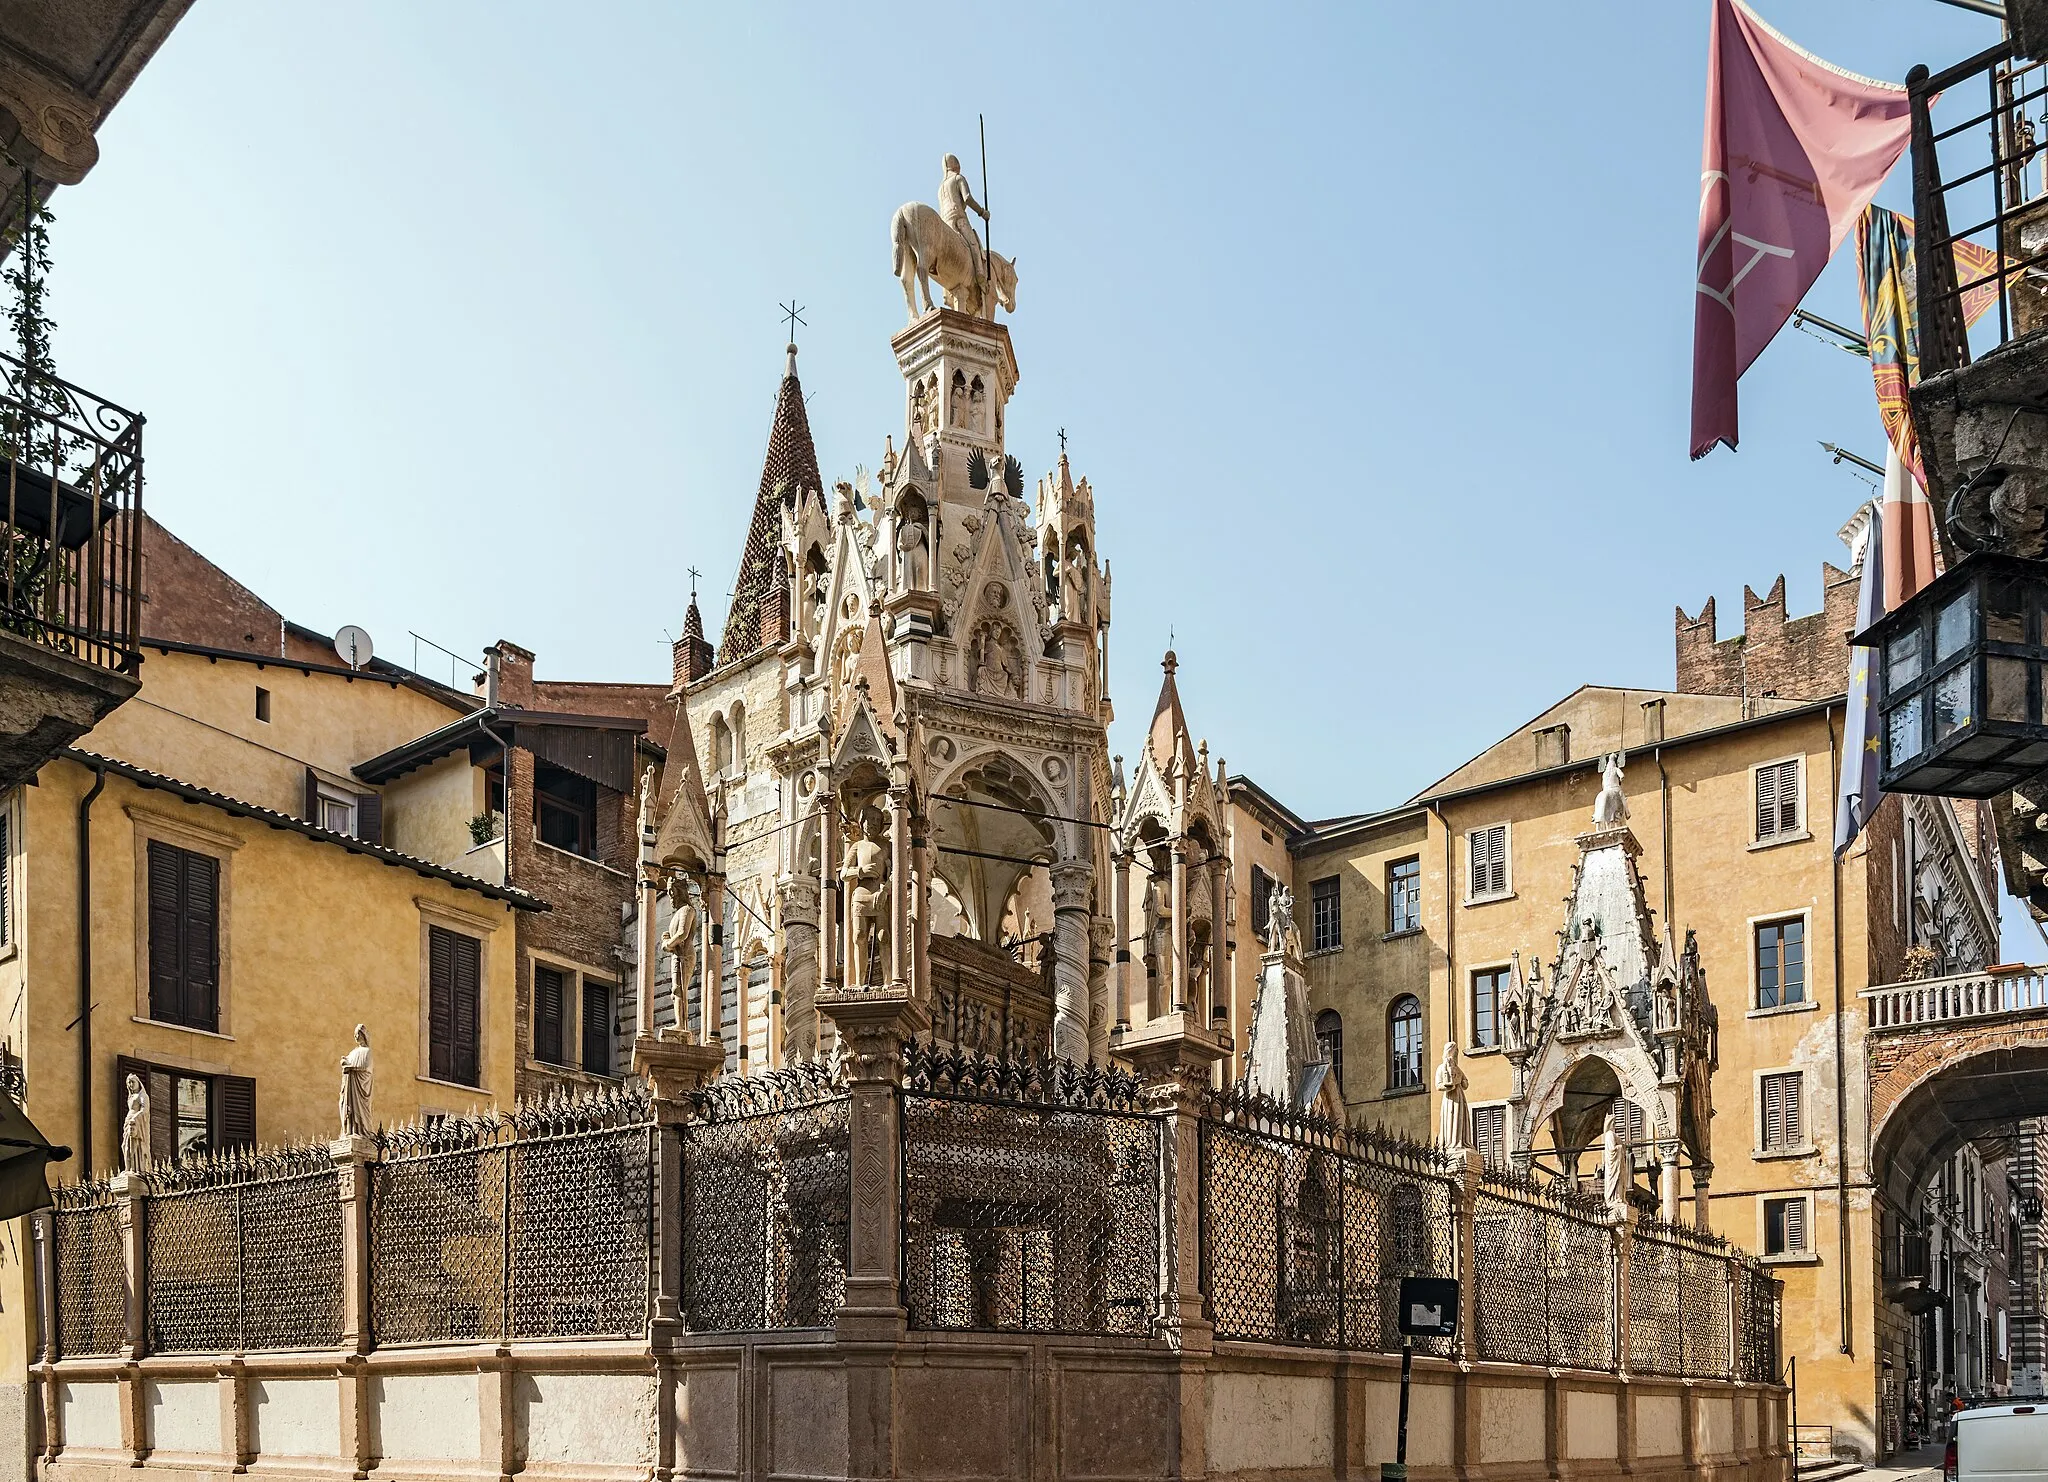 Photo showing: Scaliger Tombs in Verona. Tomb of Cansignorio the foreground, the Santa Maria Antica church and the tomb of Cangrande I della Scala, and right the tomb of Mastino II.